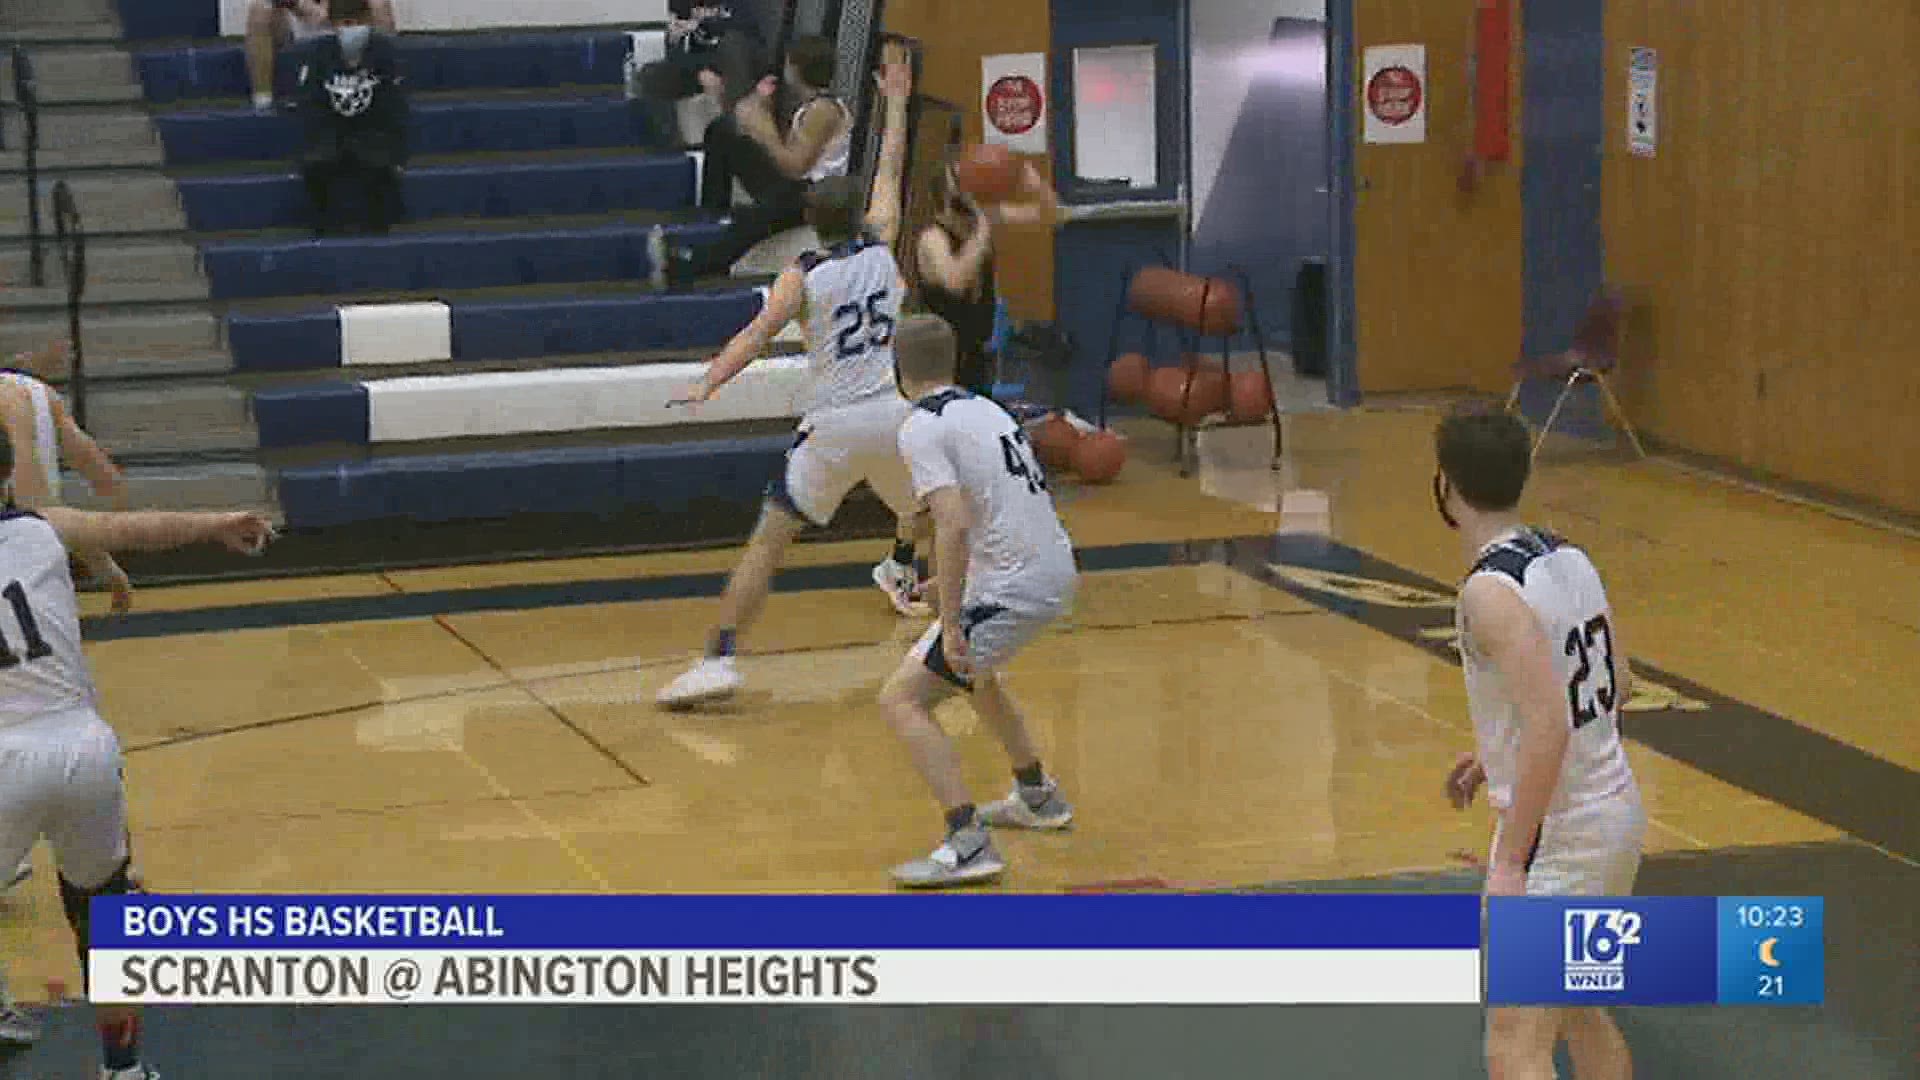 Scranton clamps down on defense and defeats Abington Heights 47-37 in boys HS basketball